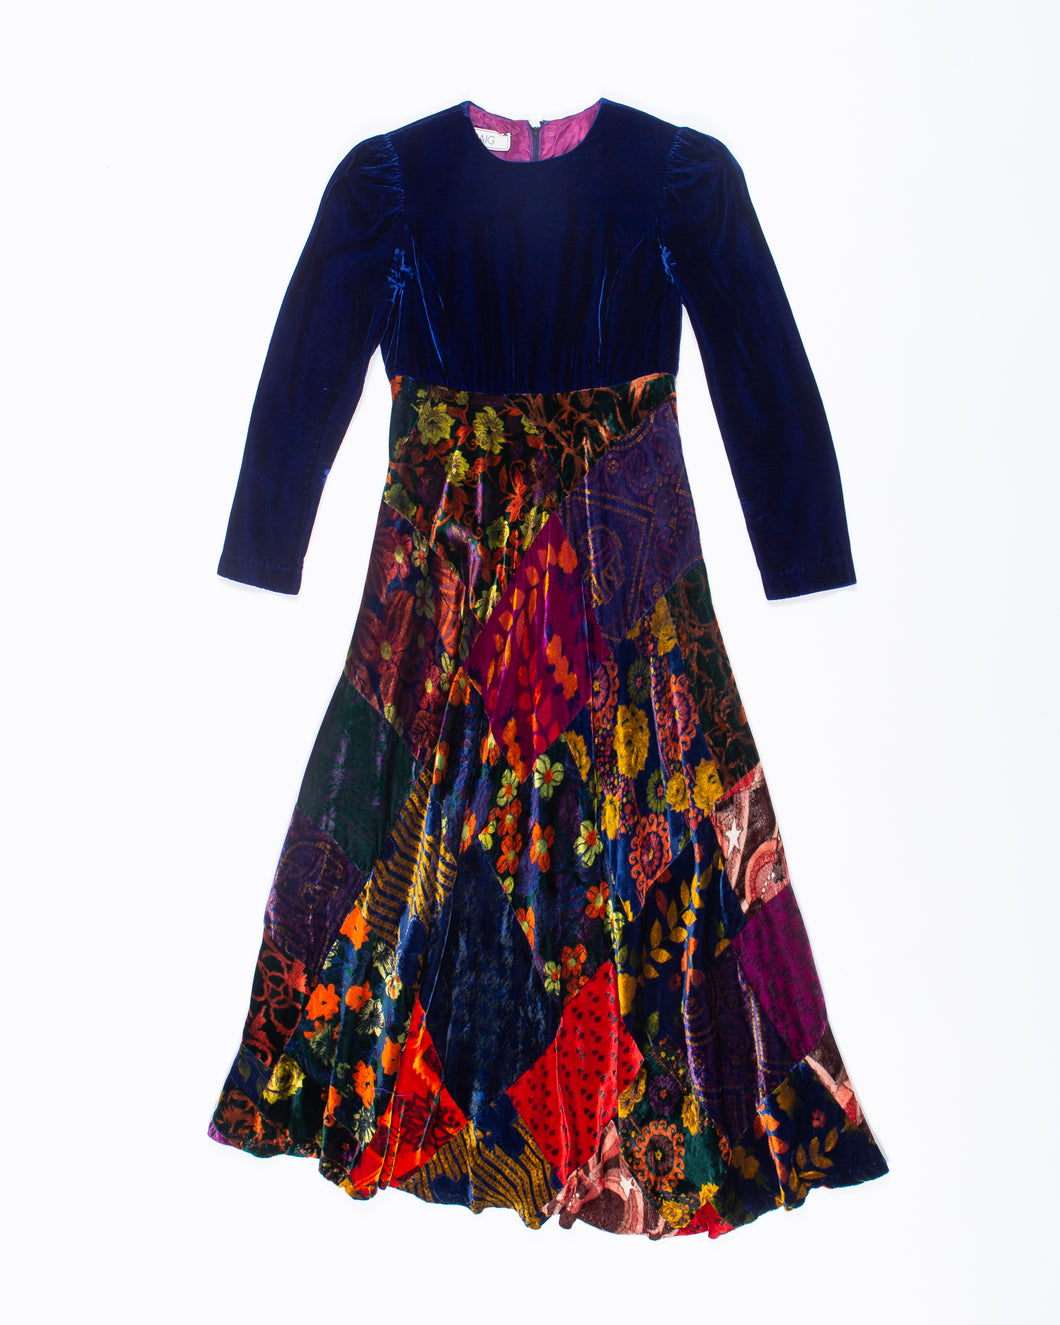 70s Deluxe Velvet Patchwork Gown by Craig London